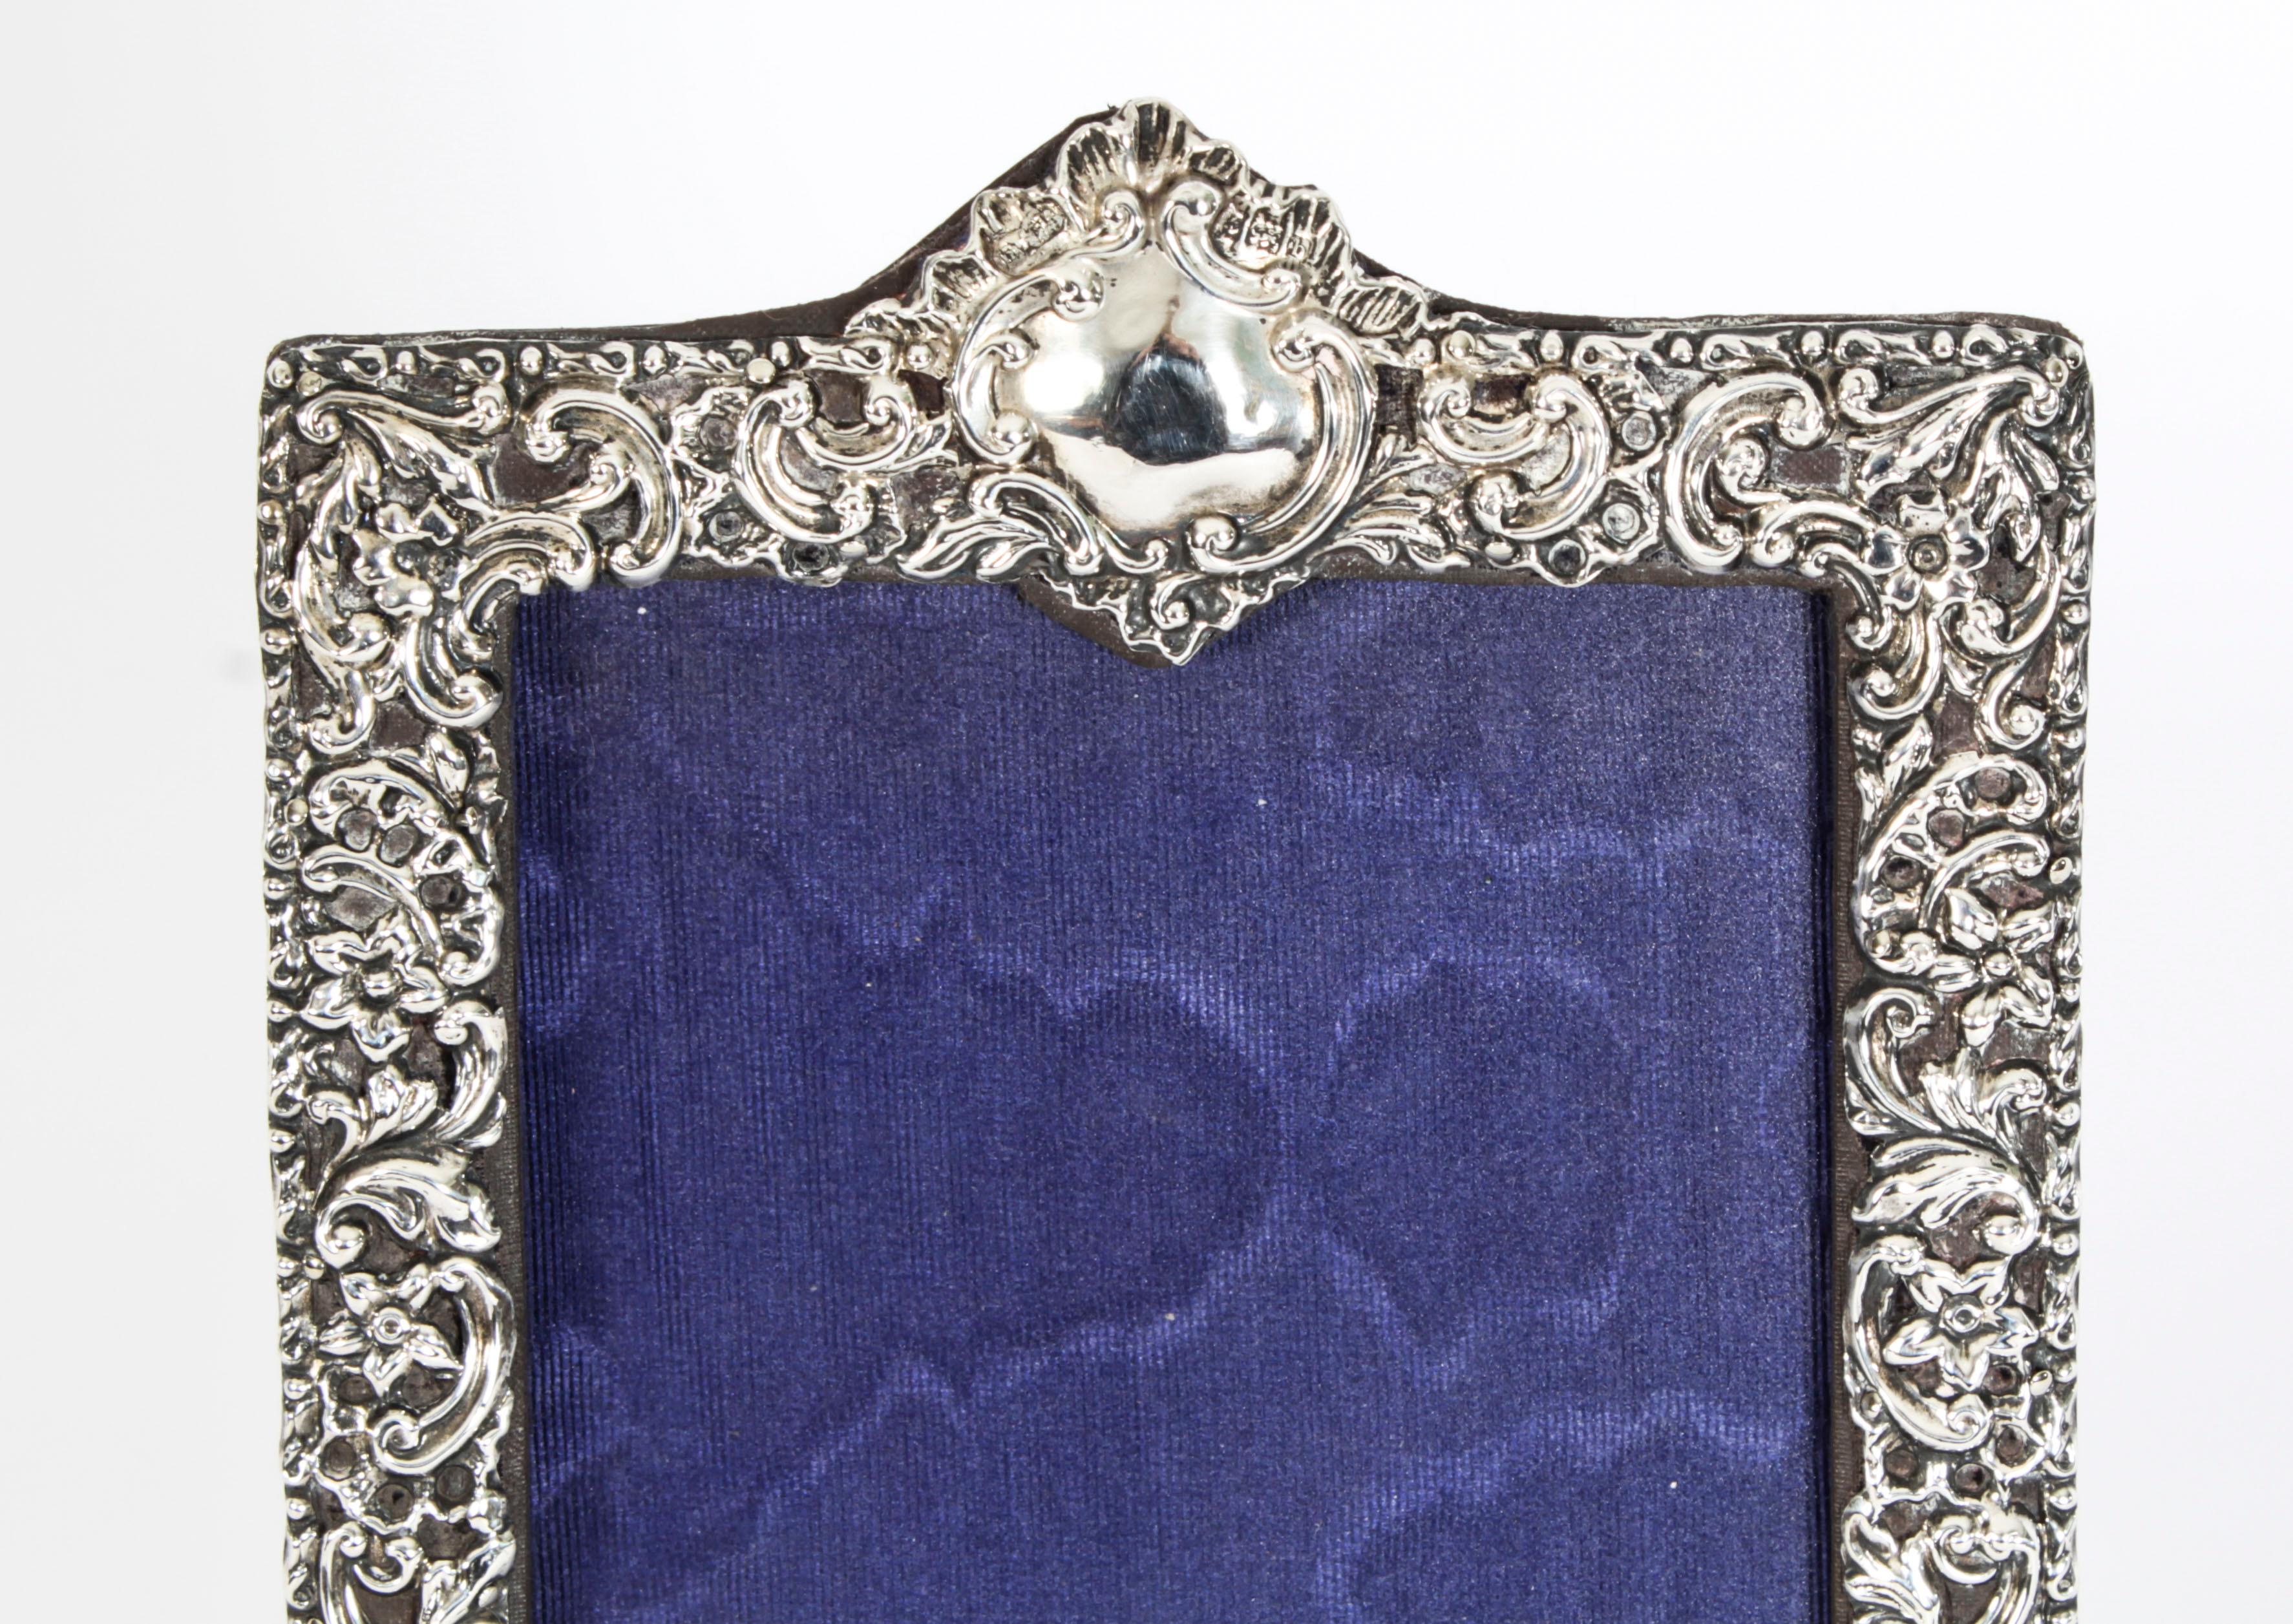 A pretty Edwardian sterling silver photograph frame having extensive cut decoration, plain cartouche and a blue leather bound easel back.
 
With hallmarks for Birmingham 1901.
 
Beautifully decorated portrait frame with floral and scroll relief